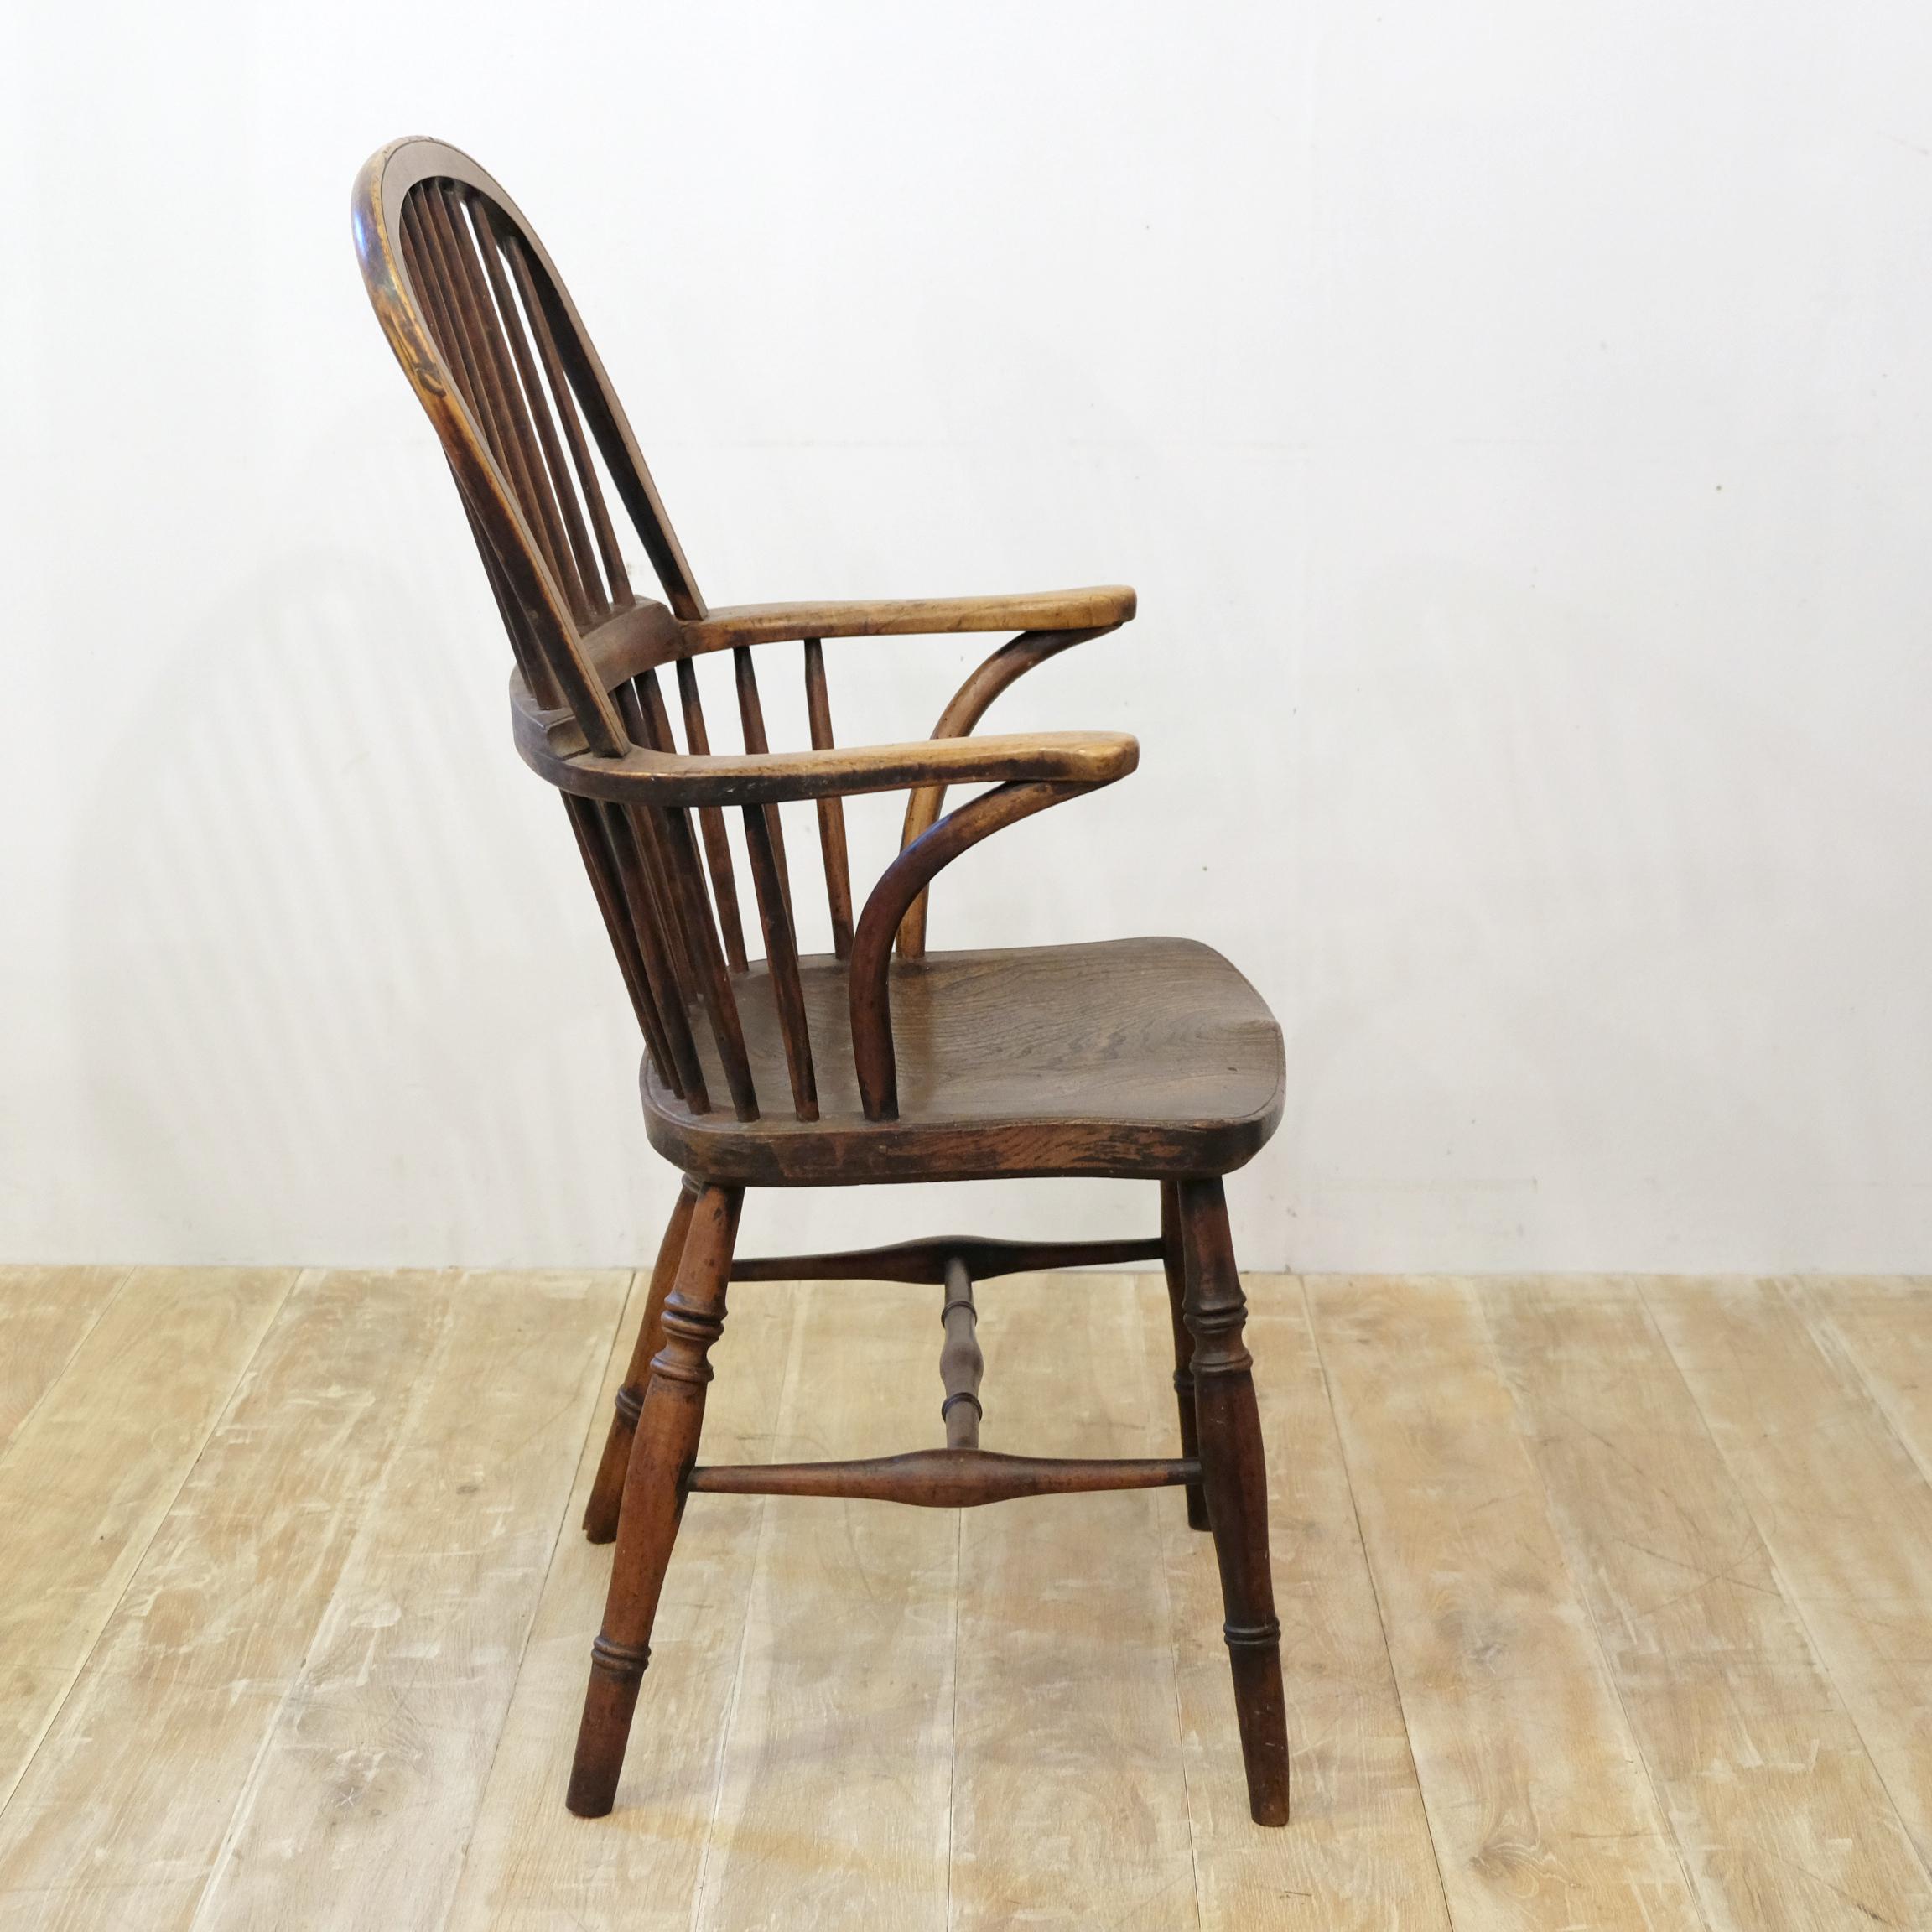 Hand-Crafted Late 19th Century English Thames Valley Windsor Chair in Ash and Elm